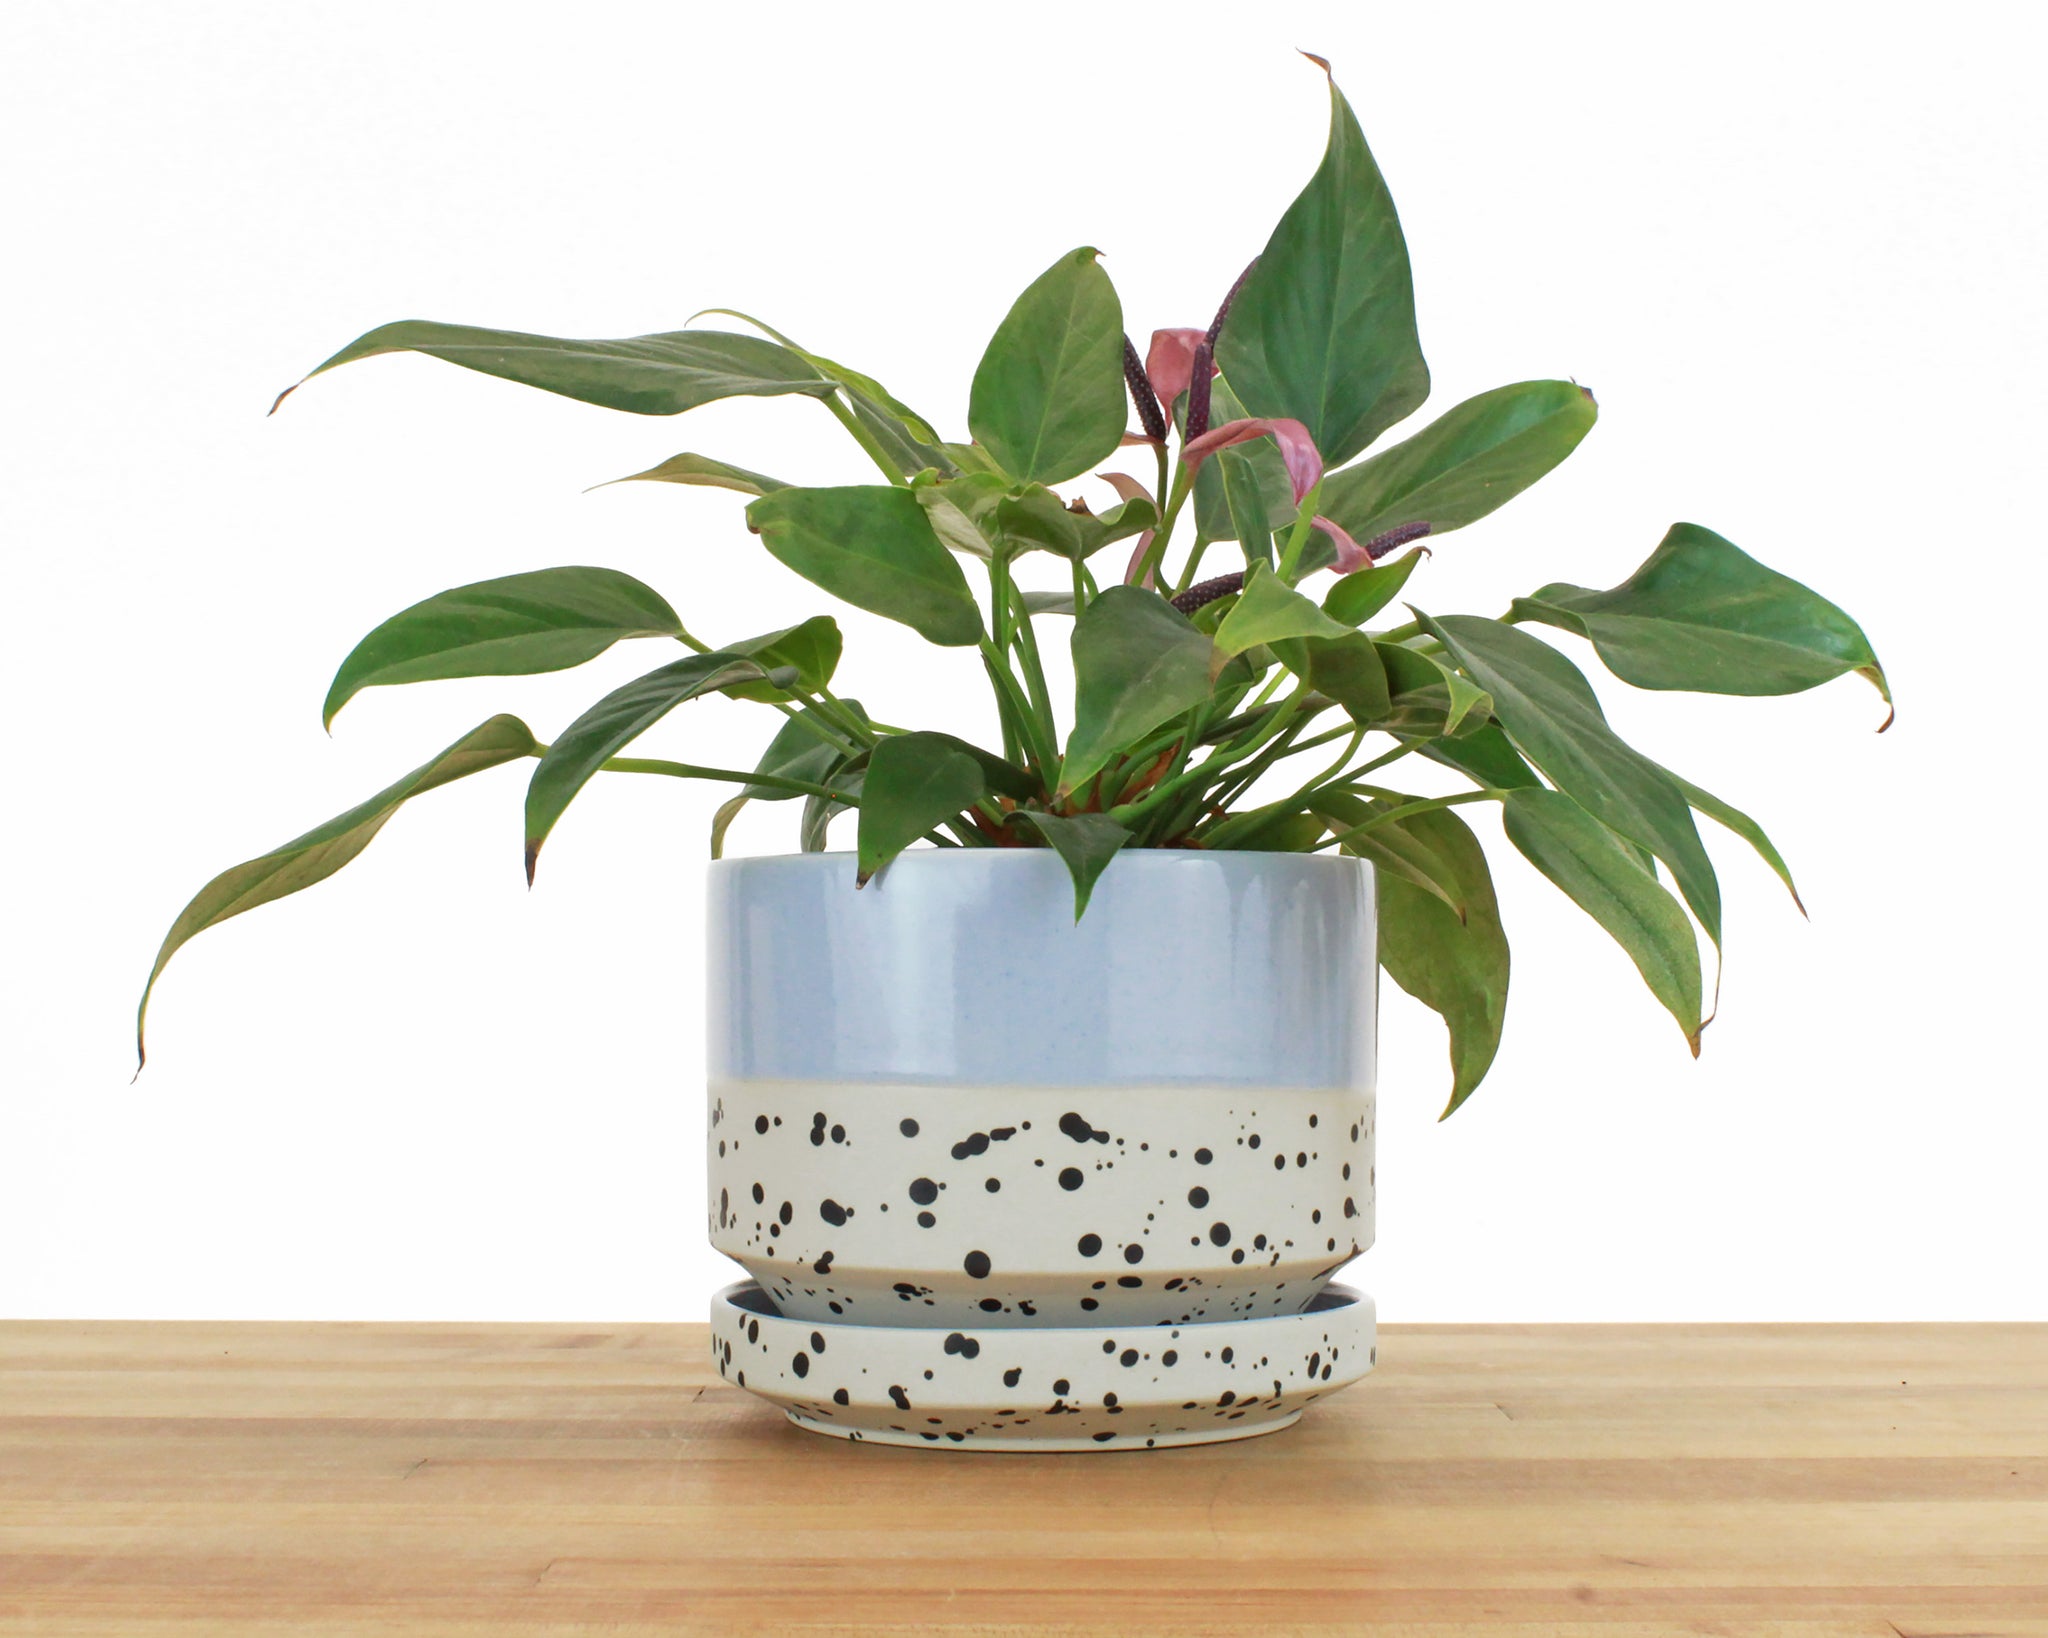 6 inch Cylinder Planter - Dipped and Dotted Periwinkle over Cream